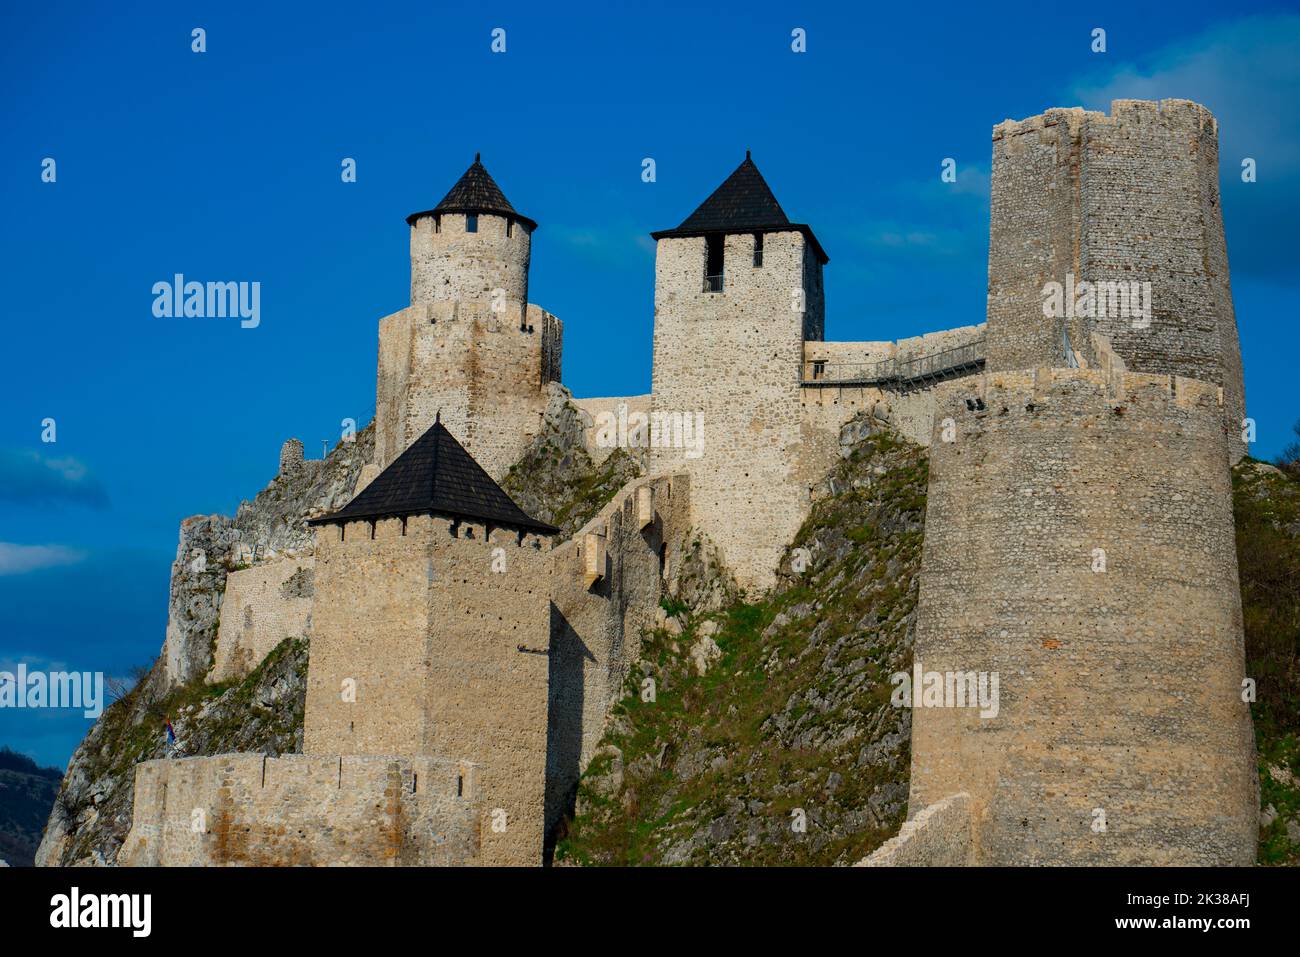 View at medieval fortress on Danube river in Golubac, Serbia Stock Photo